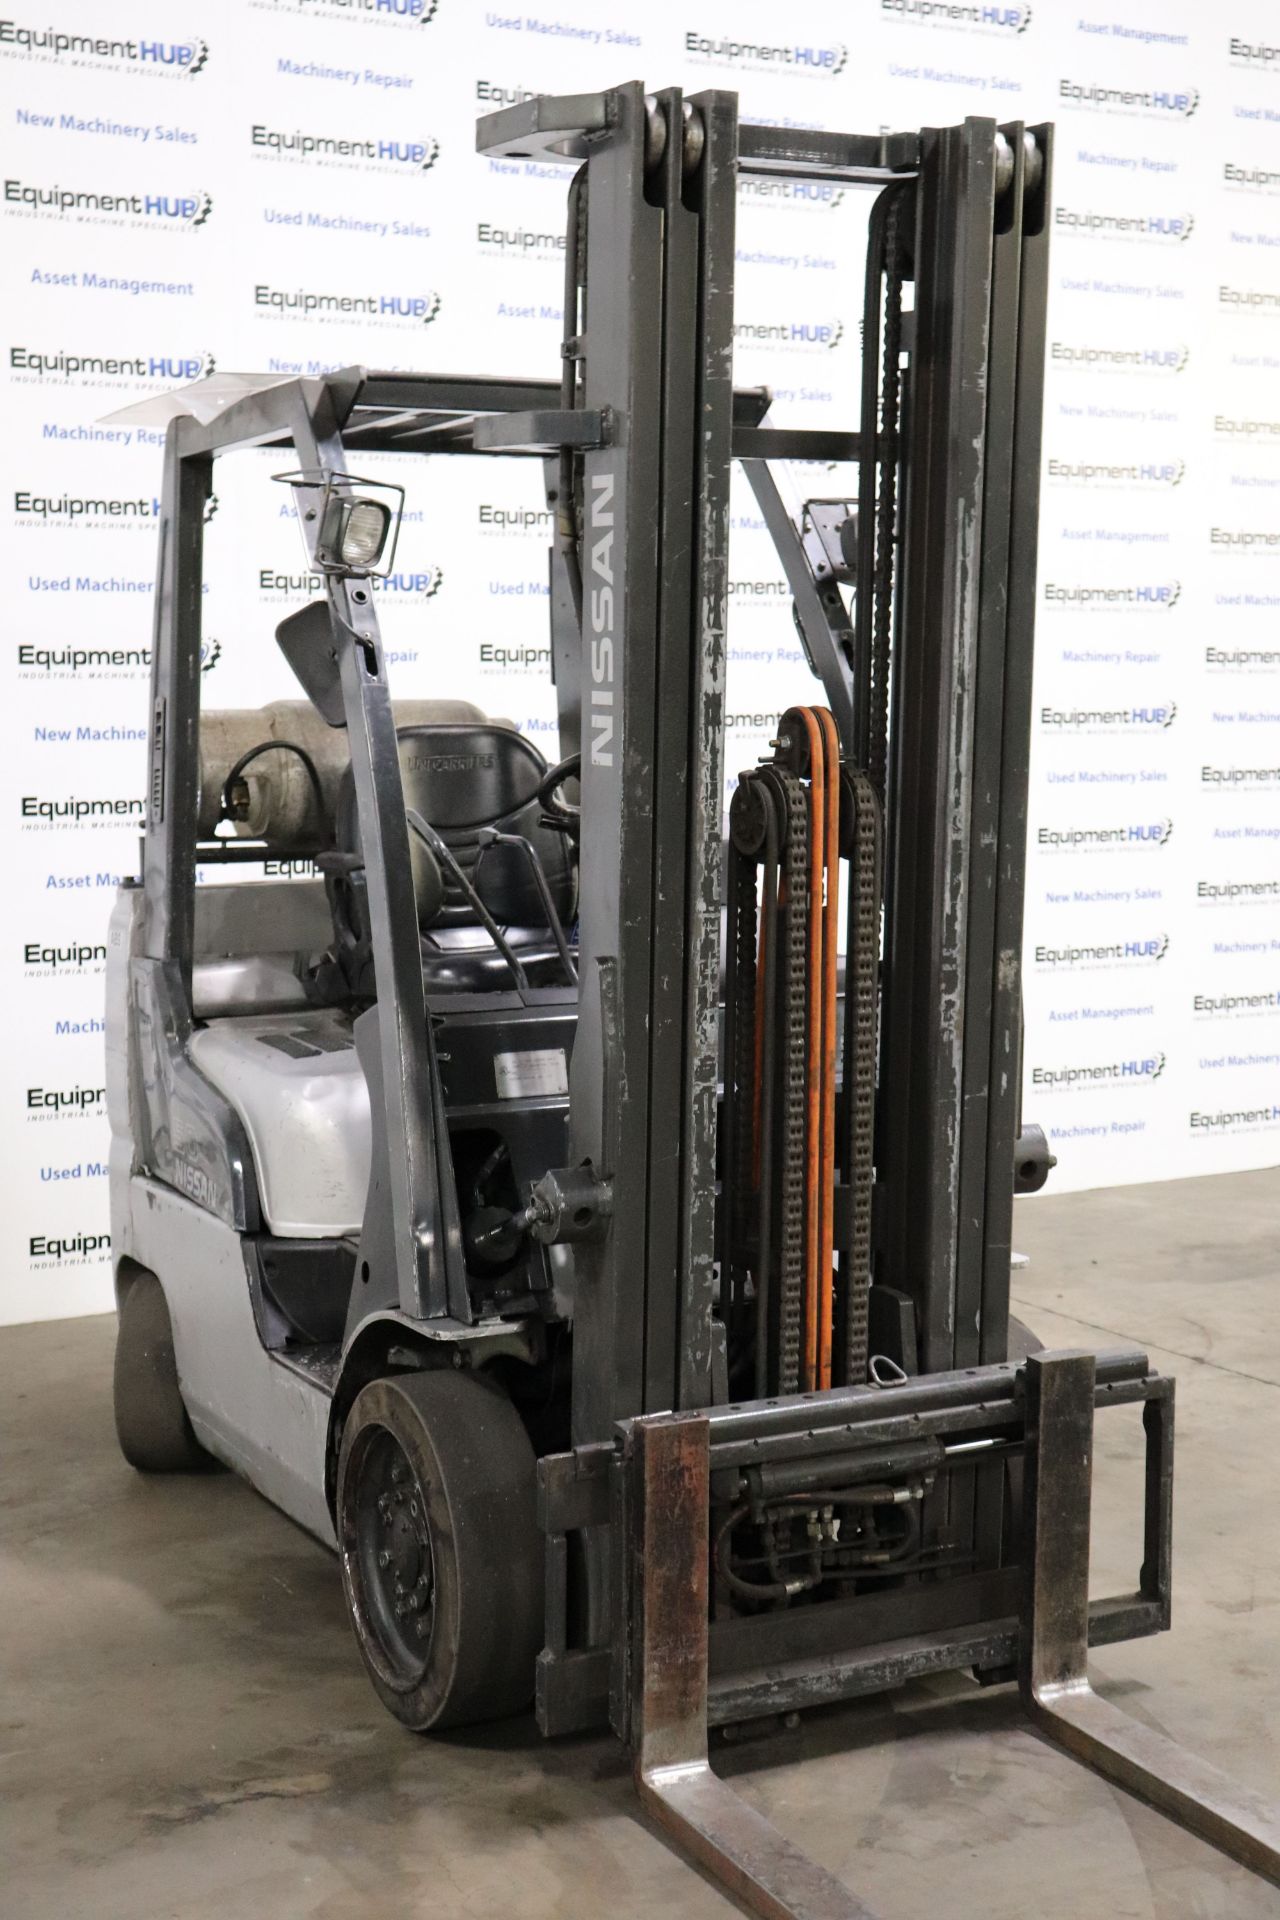 Nissan MCPL02A25LV 5000 Lb. Capacity 3 Stage Mast Cushion Propane Forklift - Image 3 of 13